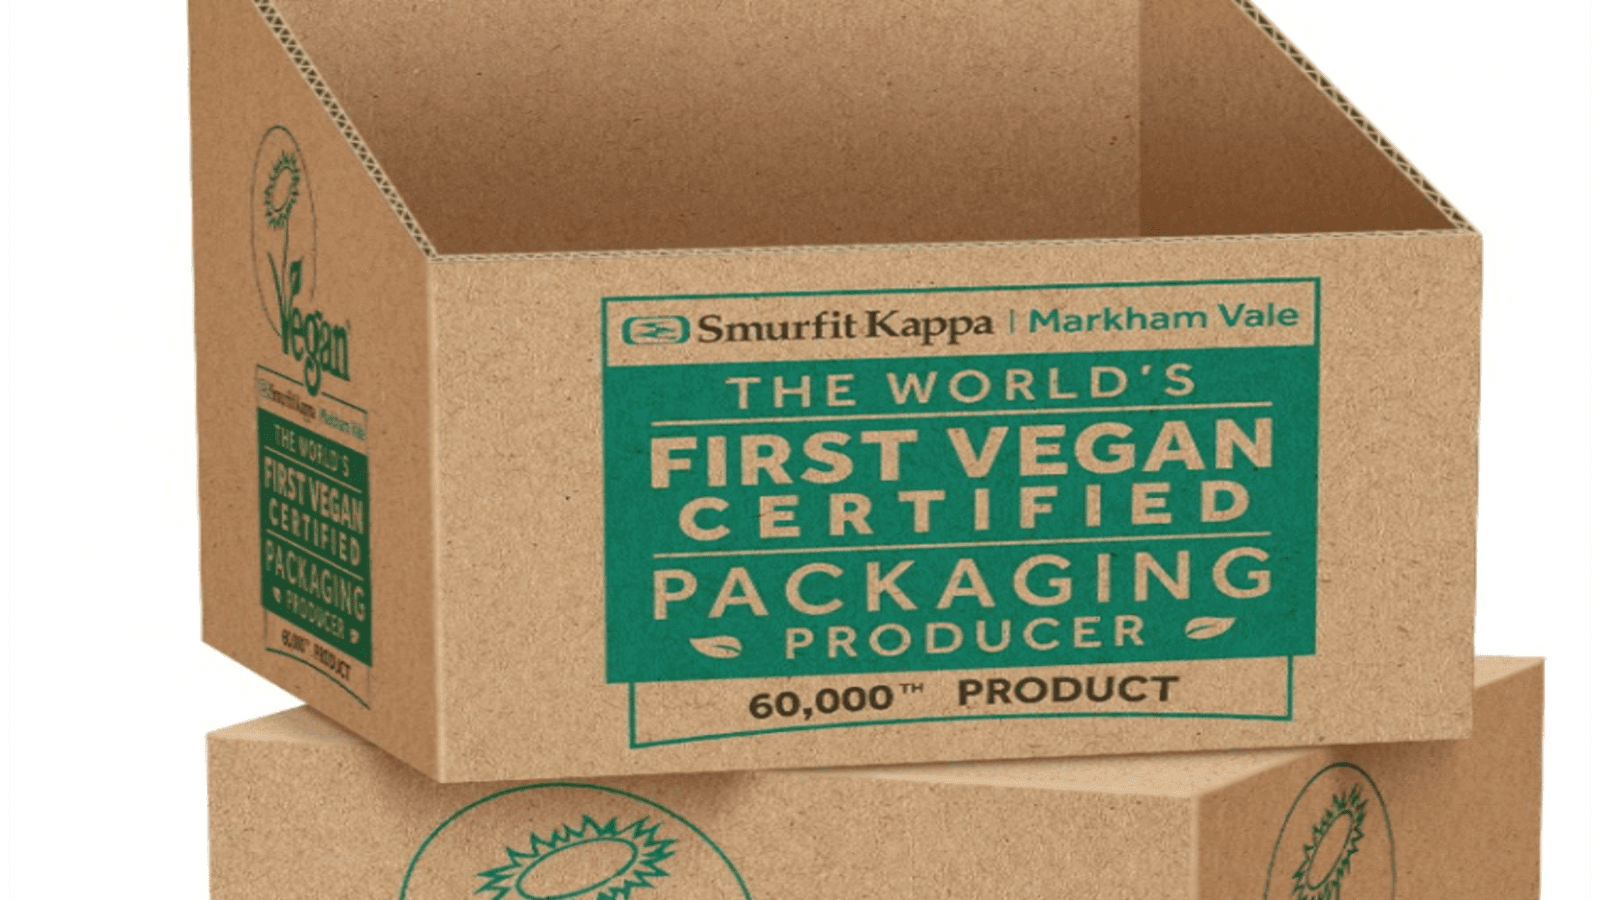 Smurfit Kappa becomes first vegan-certified packaging company amid rising concern over chemicals in food packaging